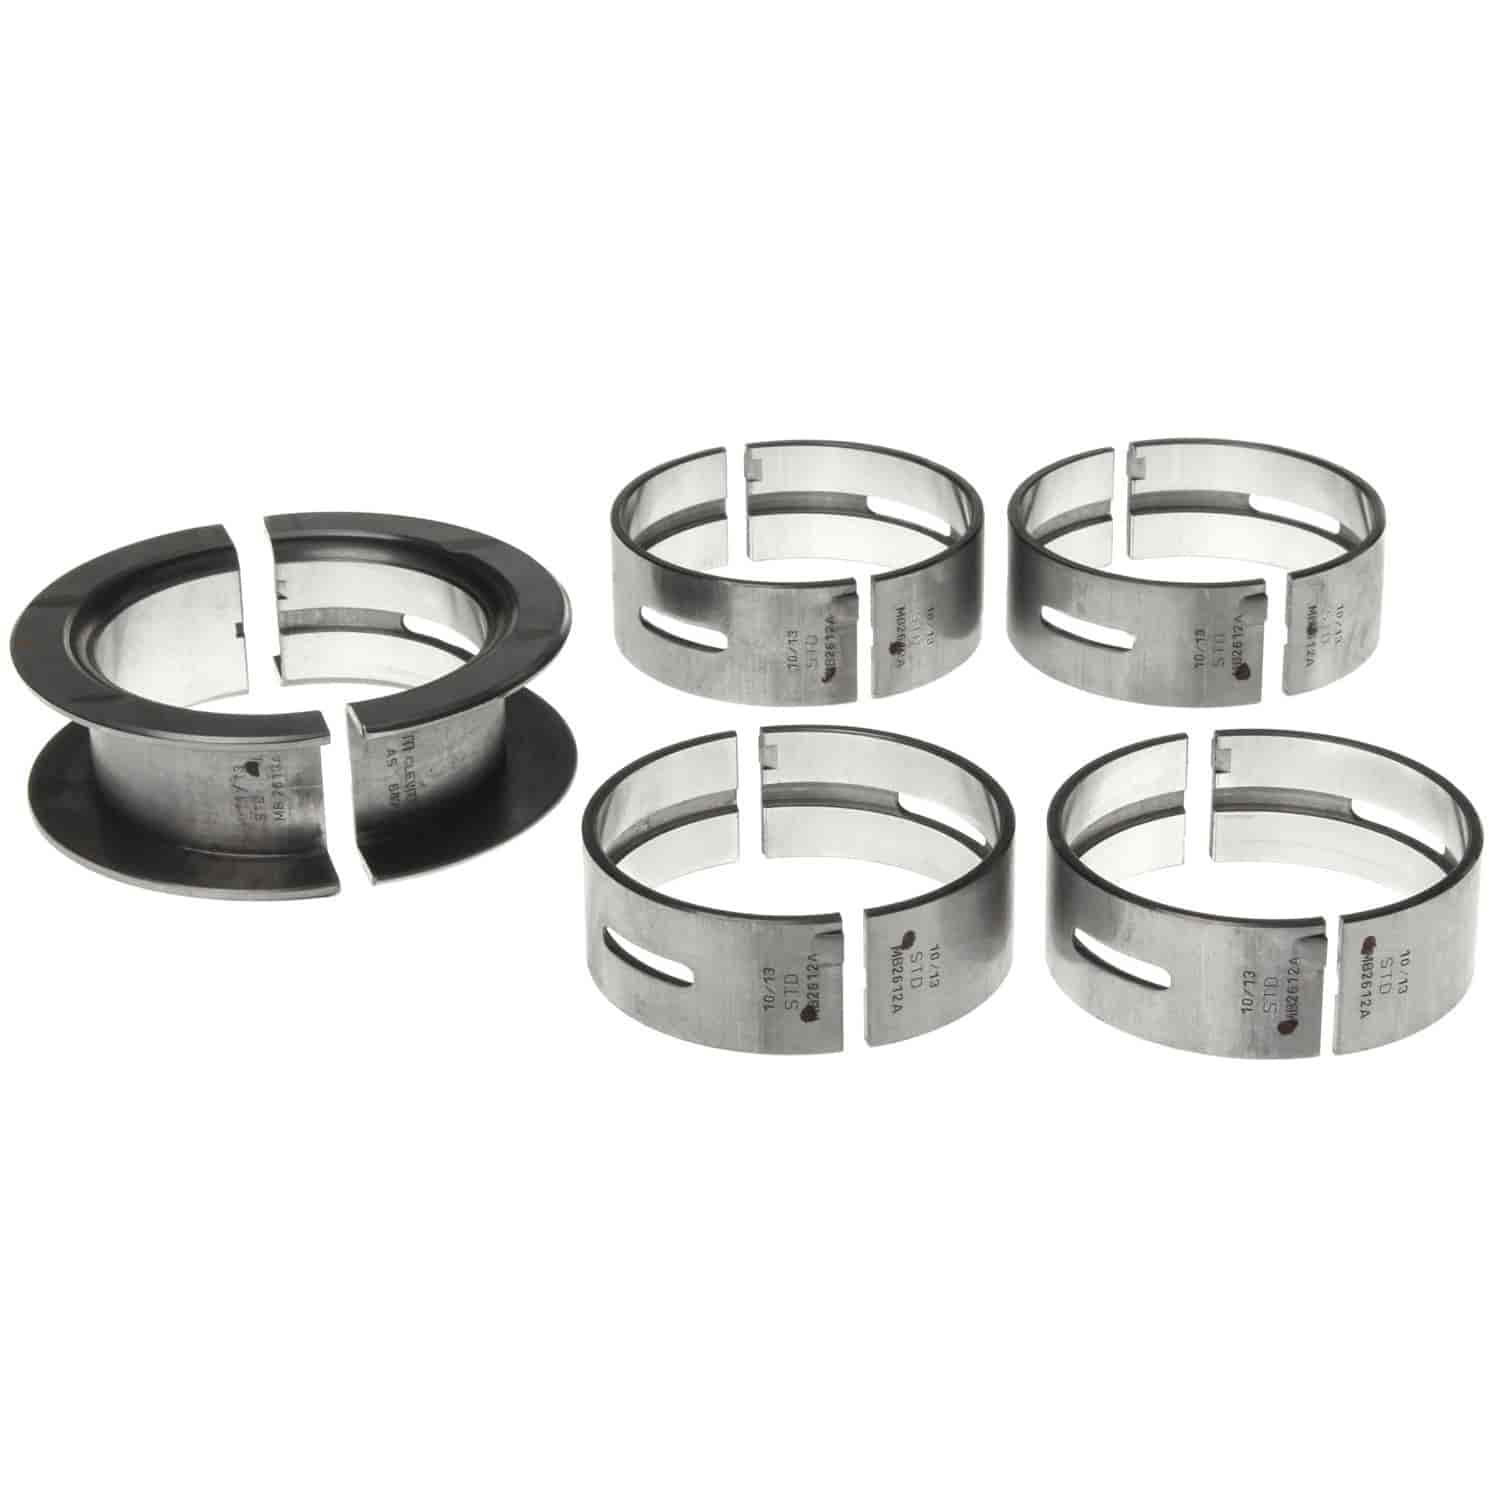 Main Bearing Set Ford 1974-1997 L4 2.0/2.3L with .50mm Undersize